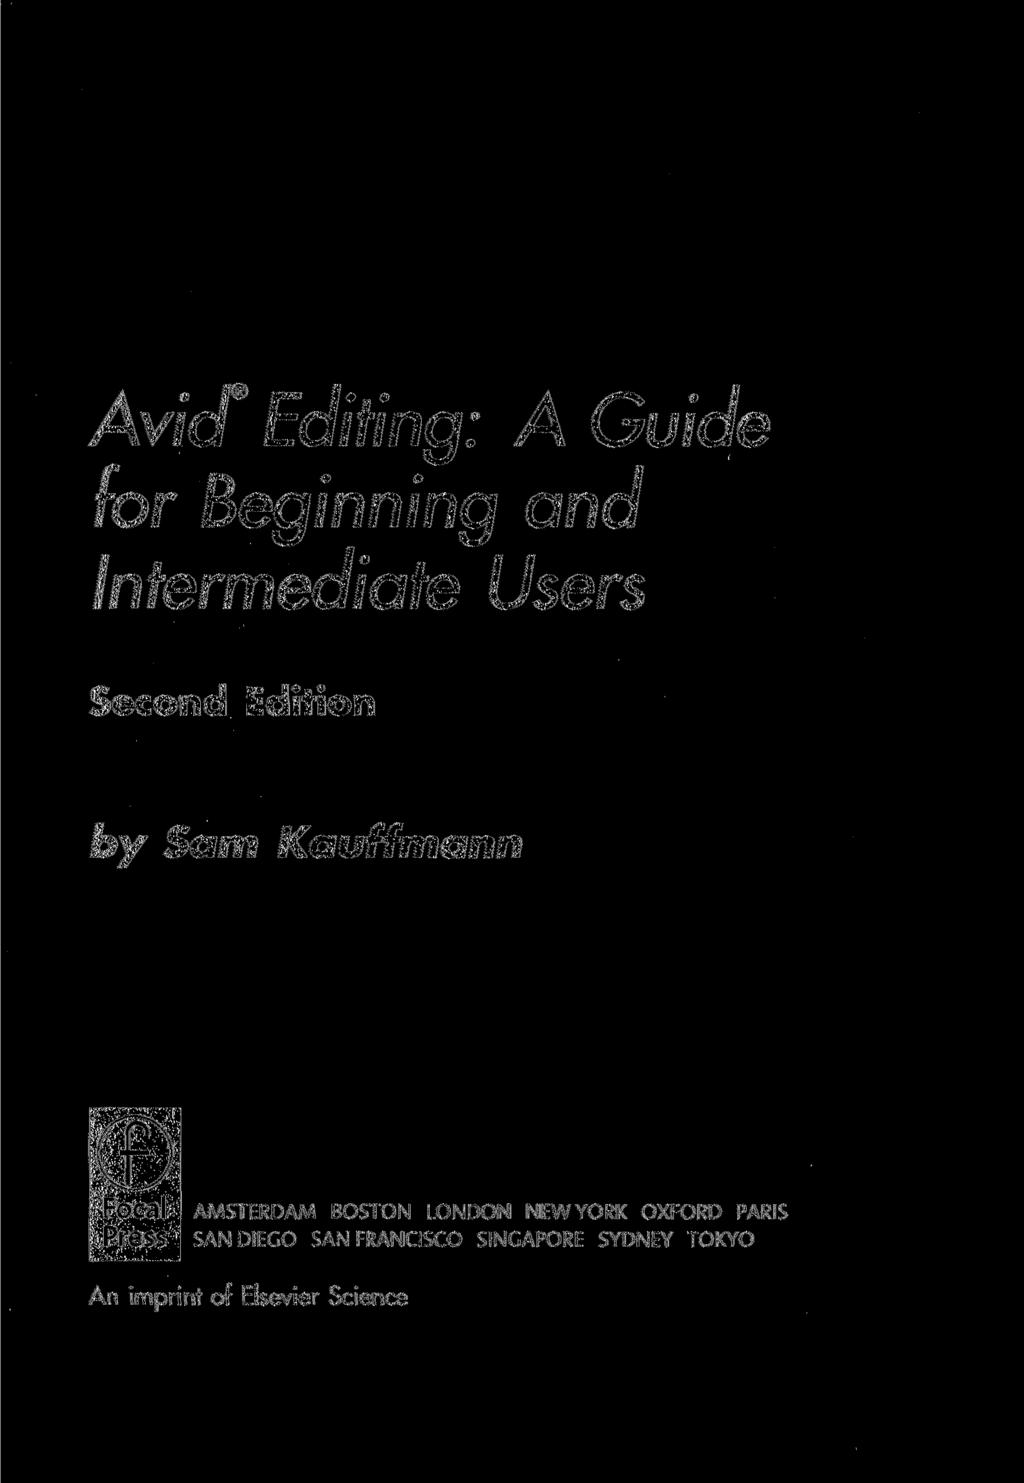 Avid @ Editing: A Guide for Beginning and Intermediate Users Second Edition by Sam Kauffmann AMSTERDAM